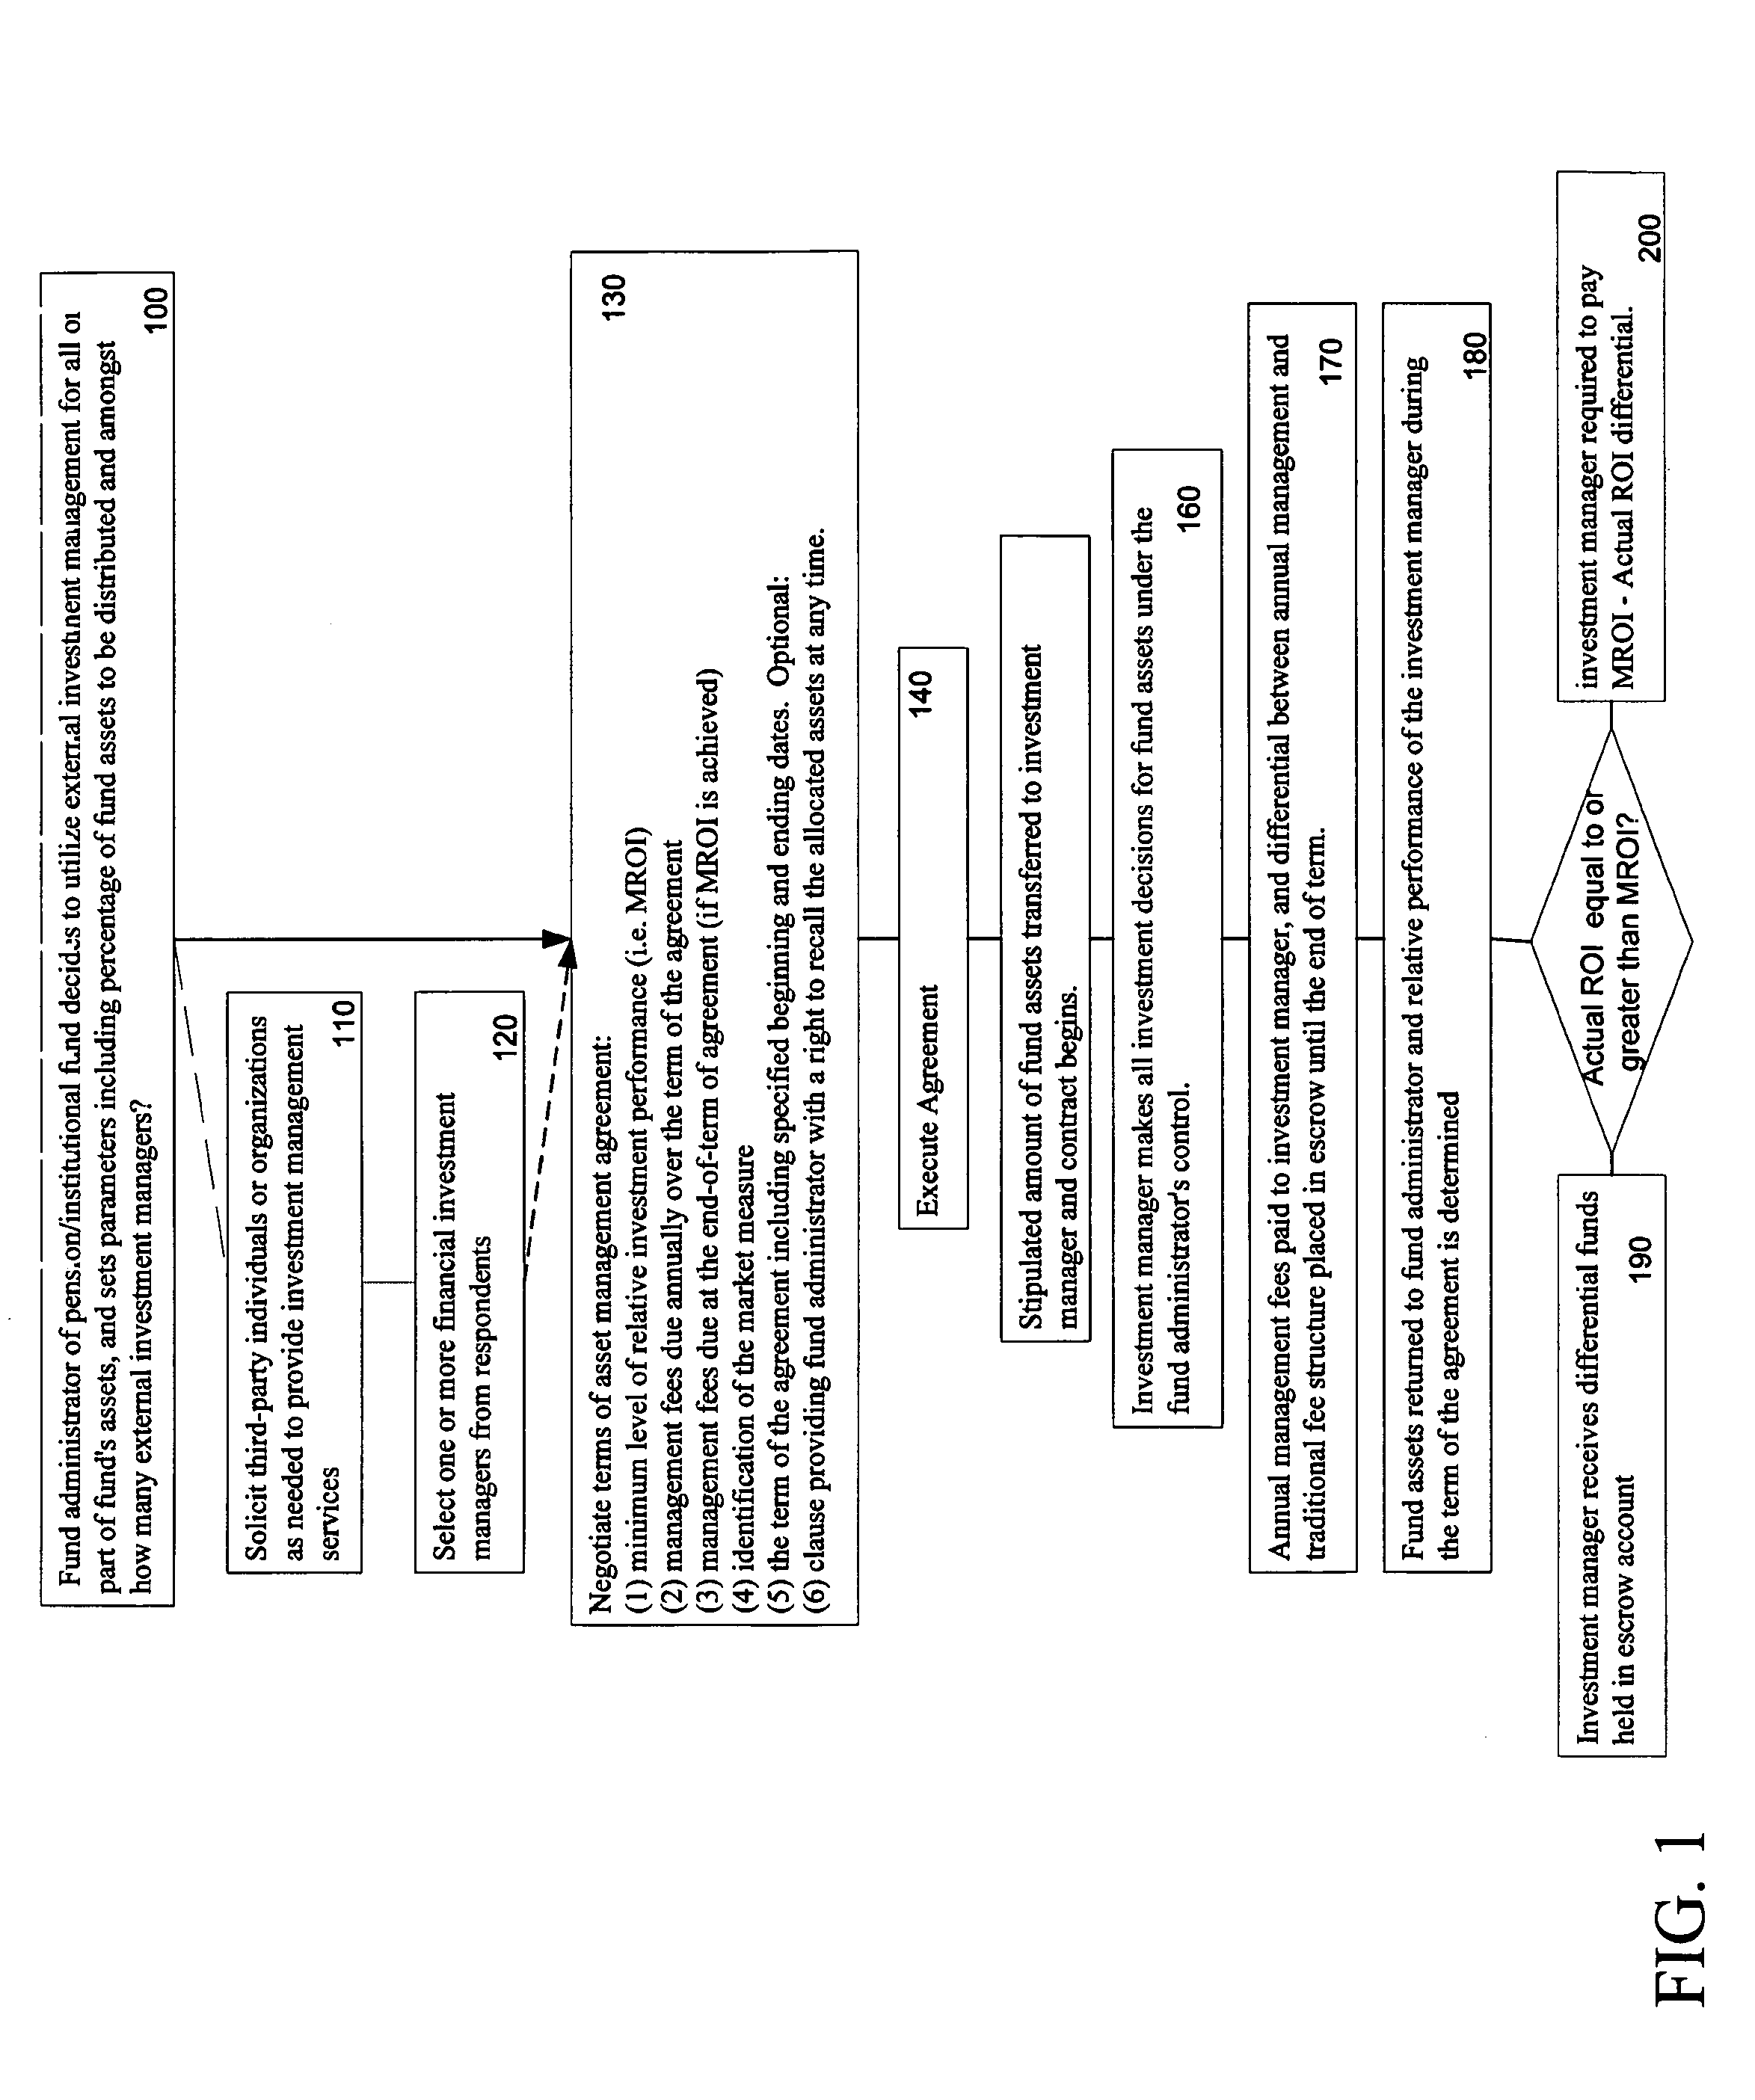 Minimum relative performance method for allocating assets among one or more third-party investment managers